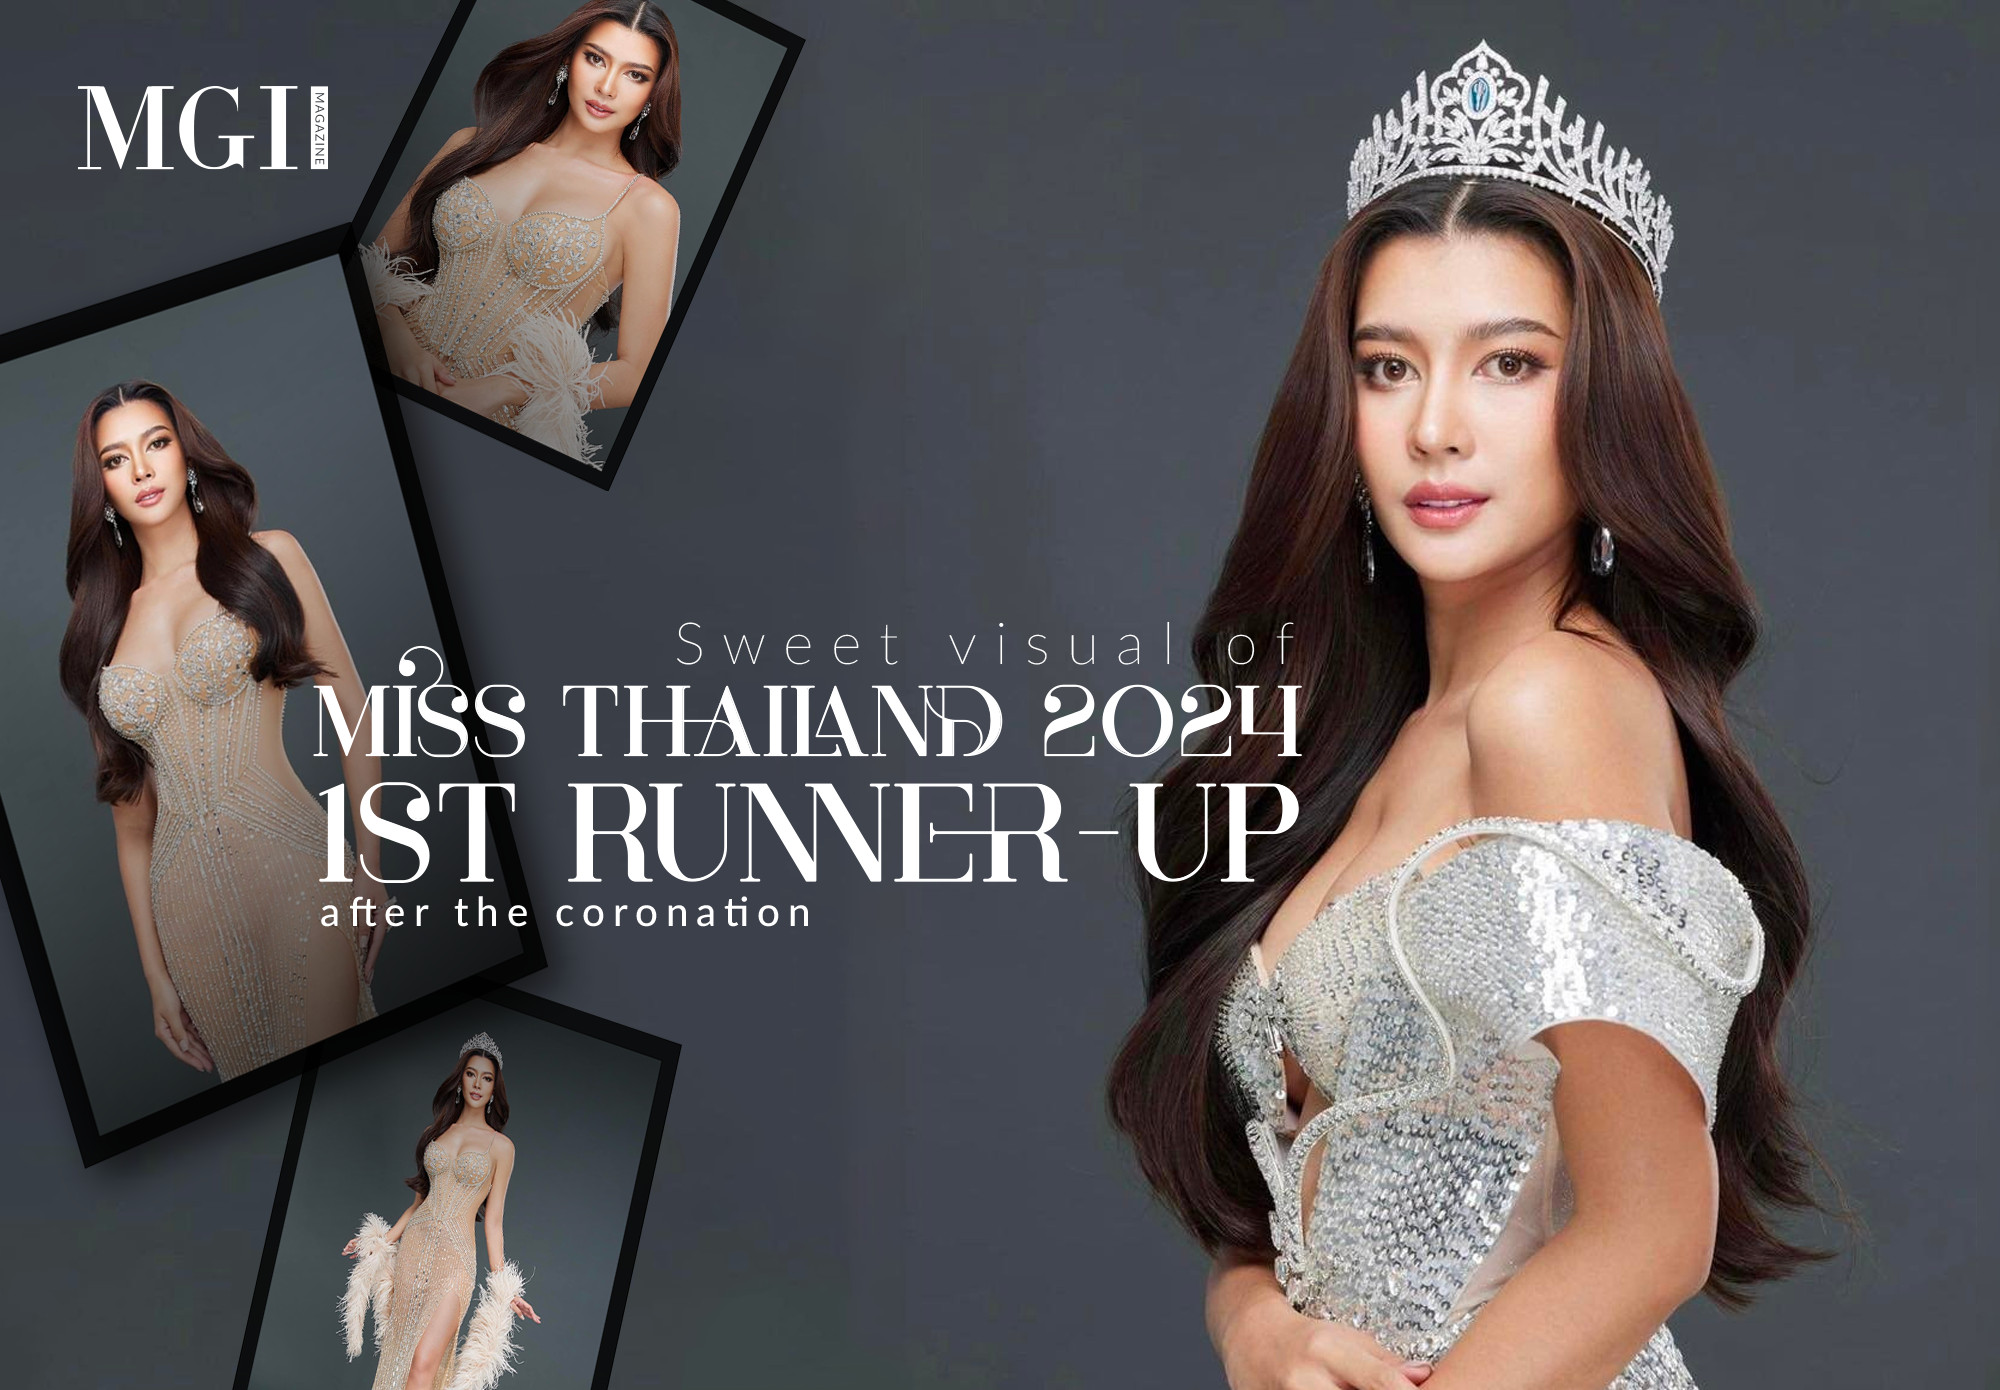 Sweet visual of 1st runner-up Miss Thailand 2024 after the coronation